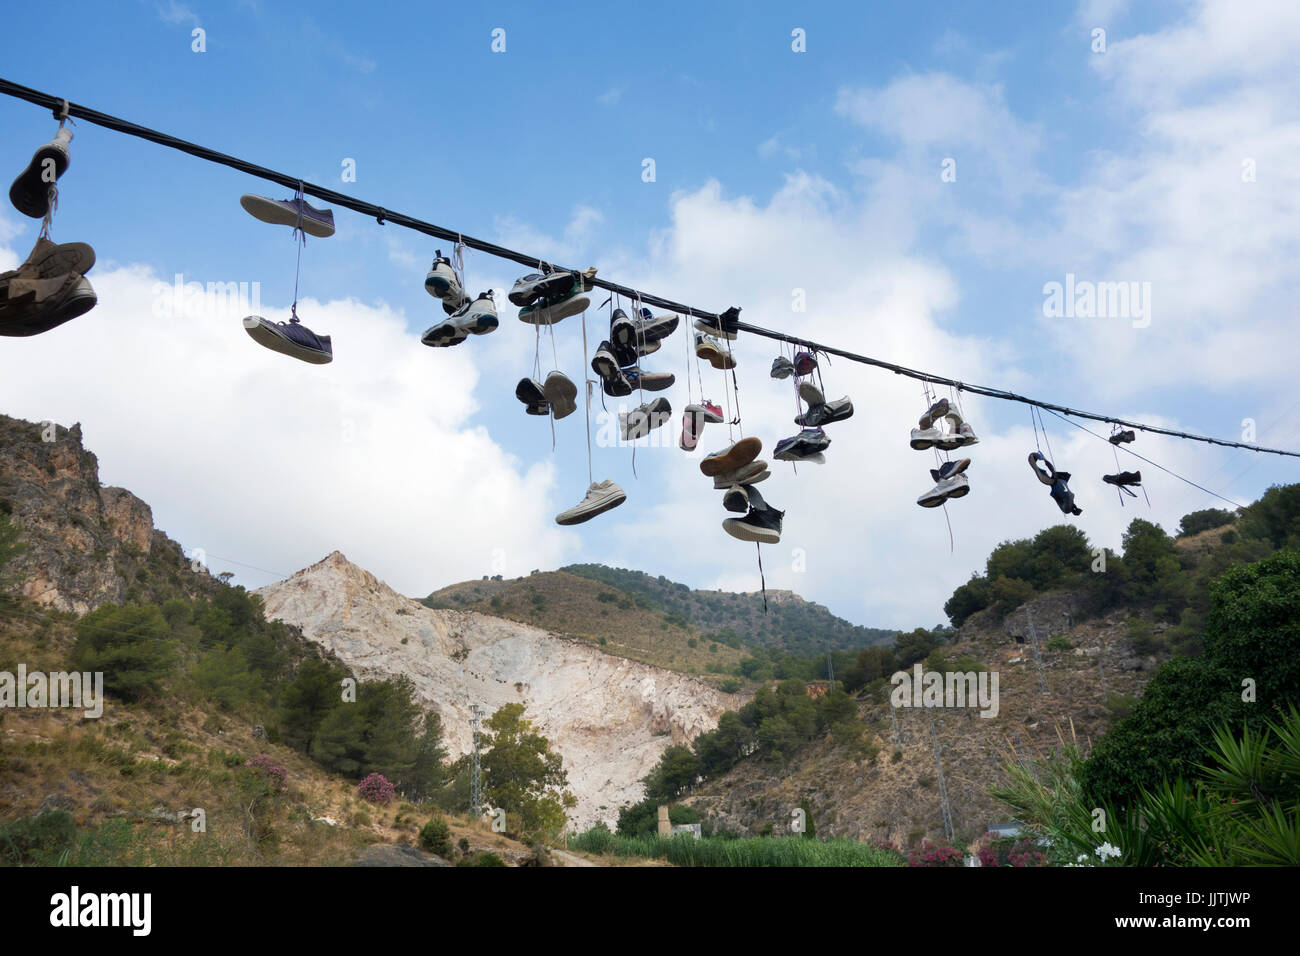 Lots of trainers or running shoes hanging from a cable in Spain Stock Photo